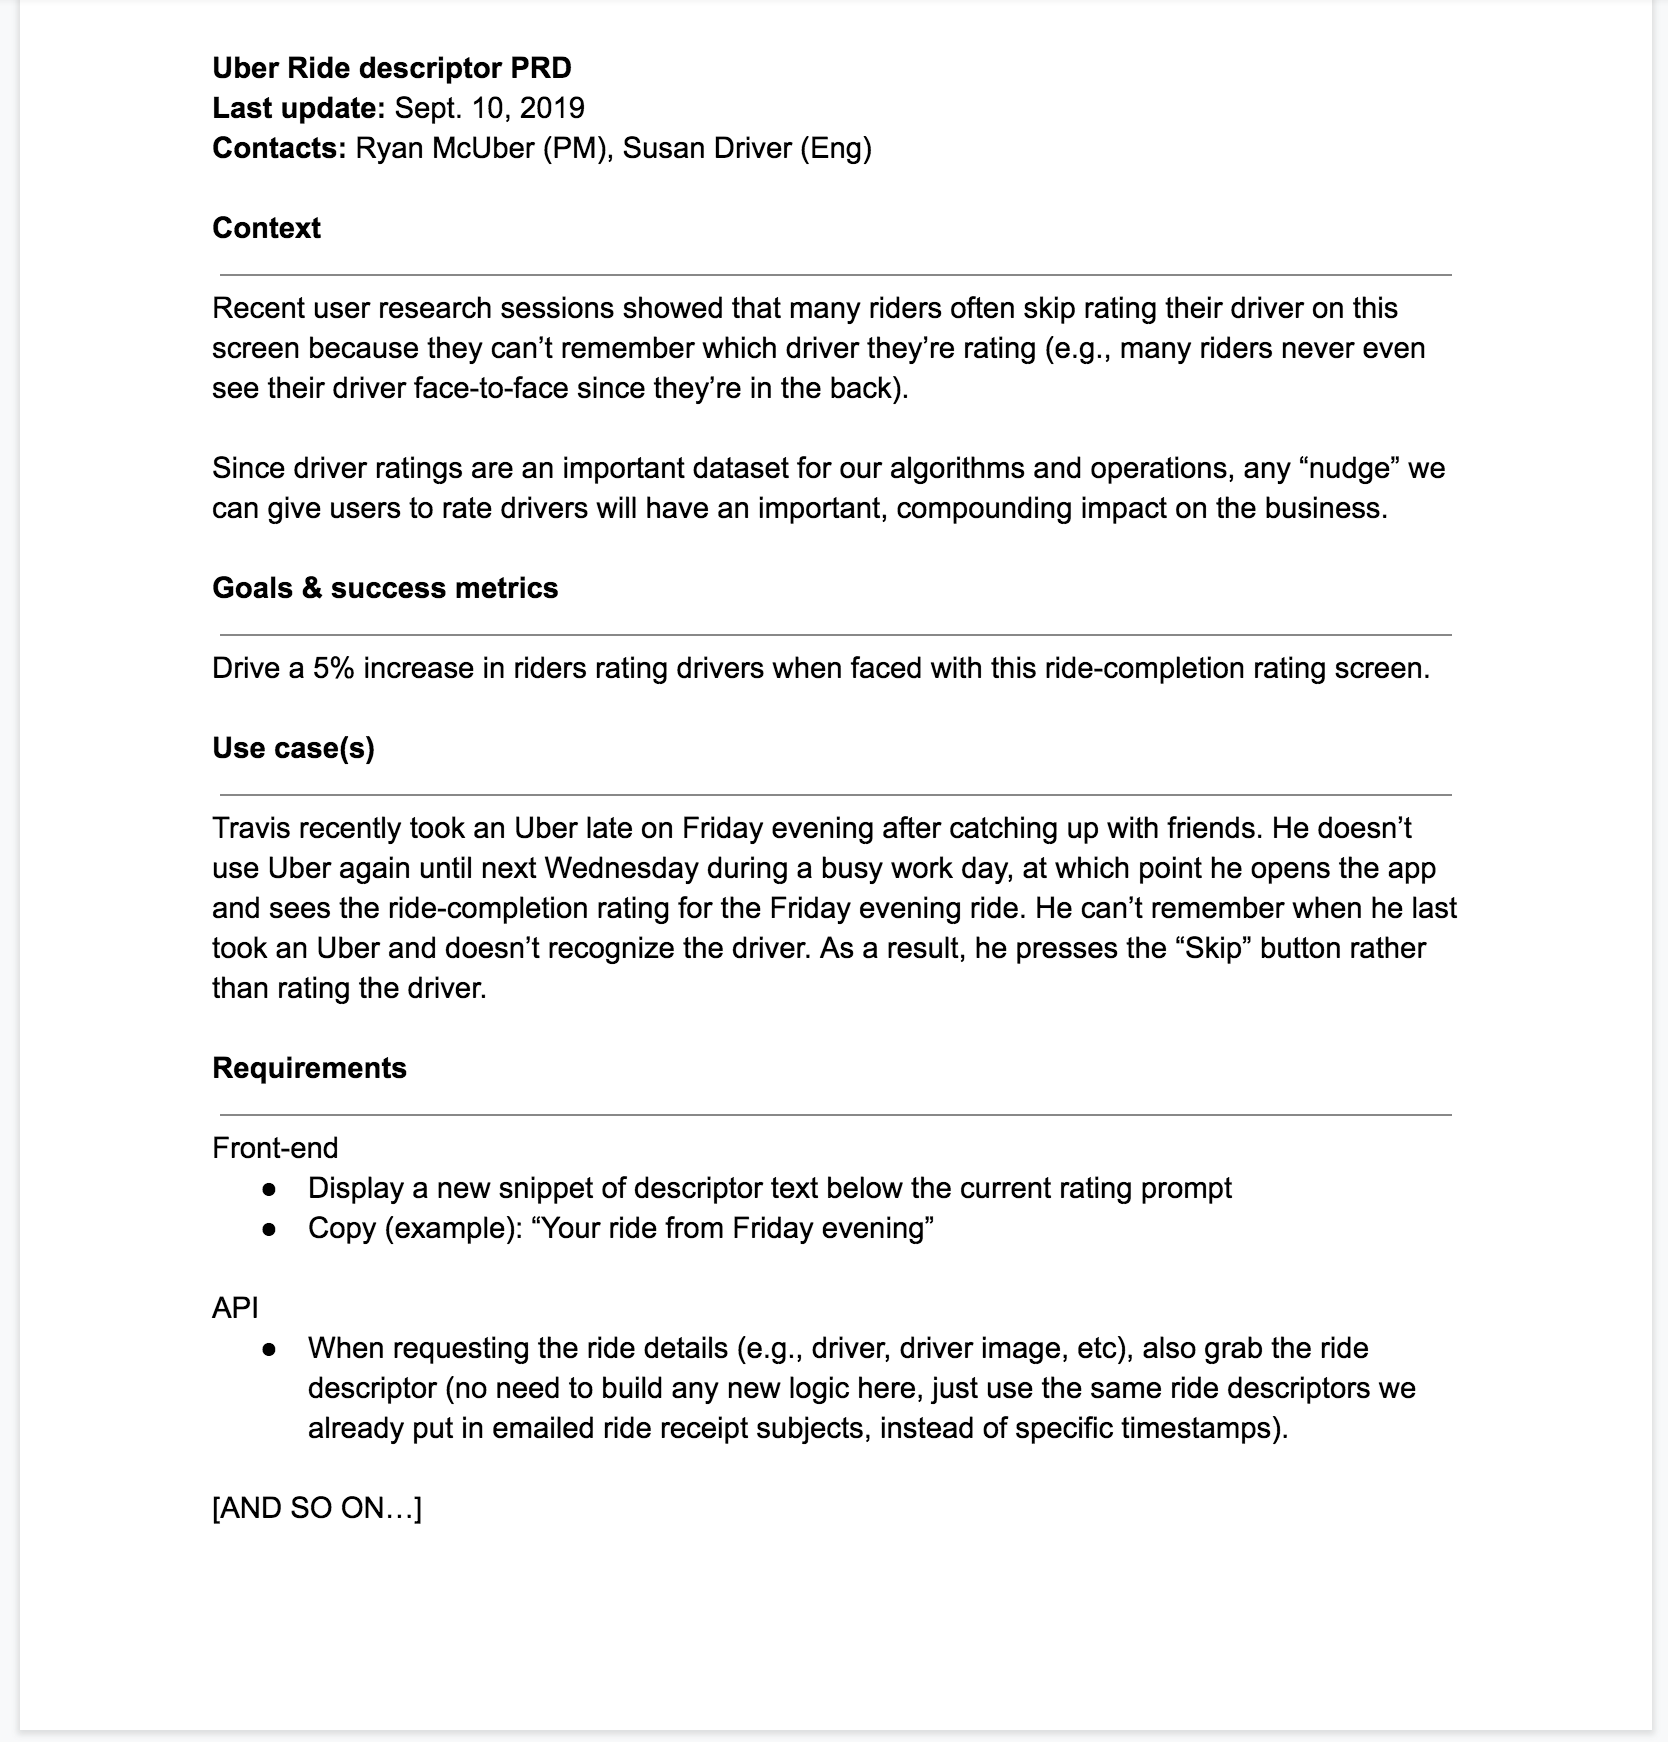 Sample Uber PRD document (fictional, not a real document)